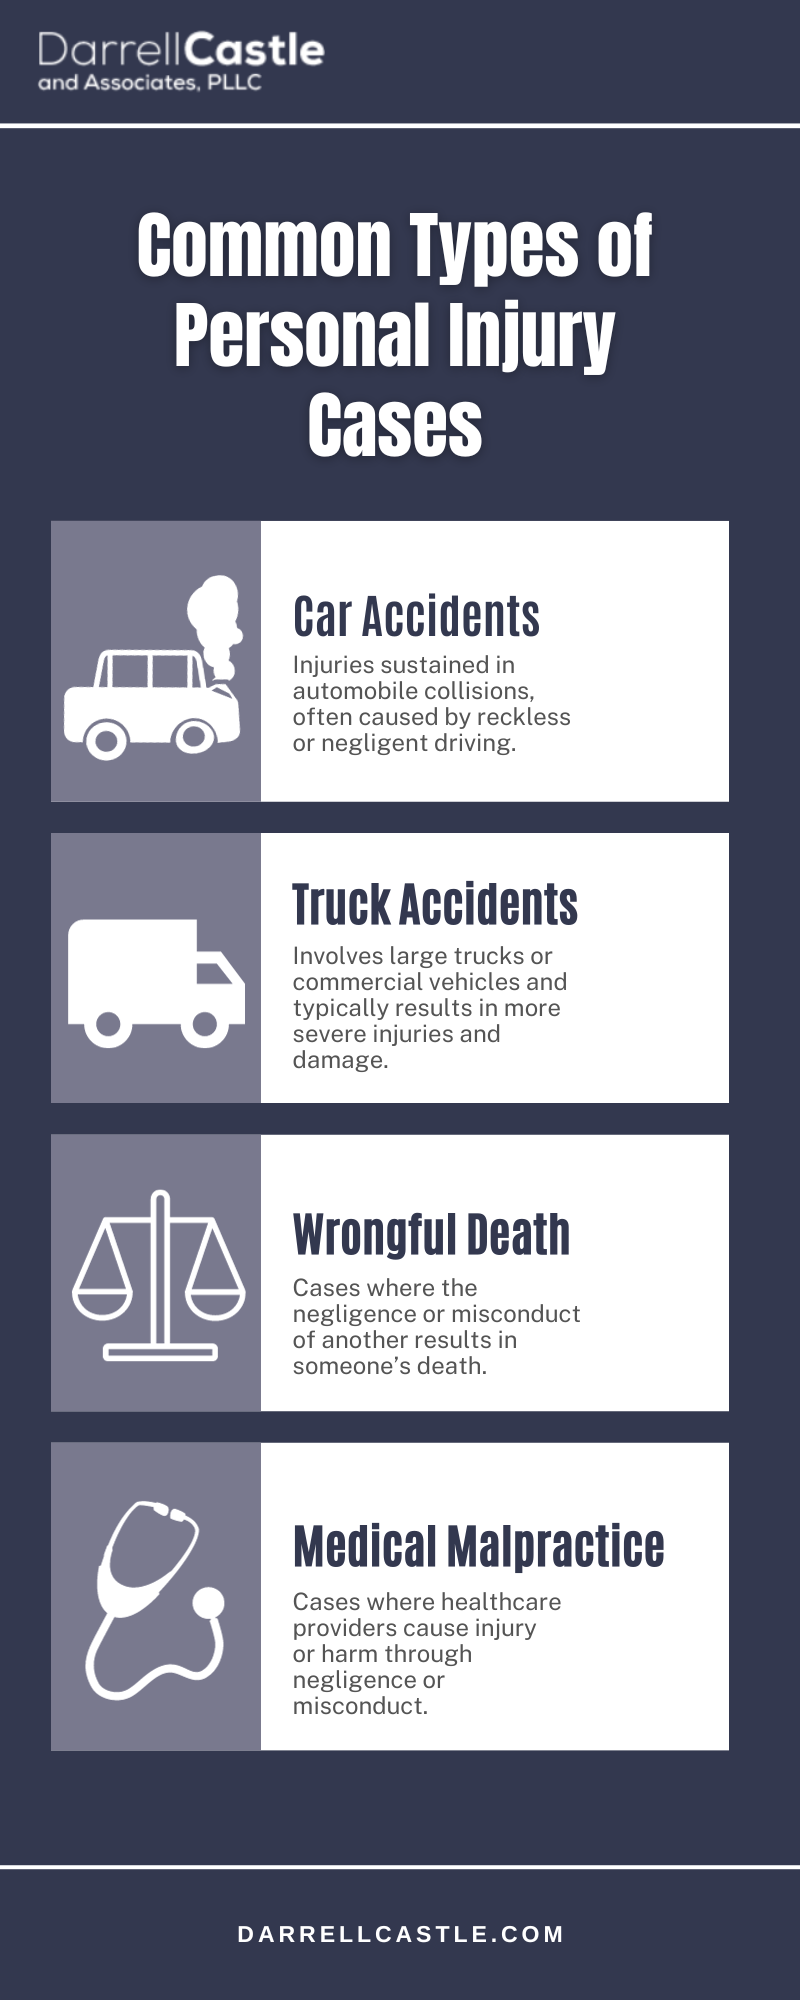 Common Types Of Personal Injury Cases Infographic